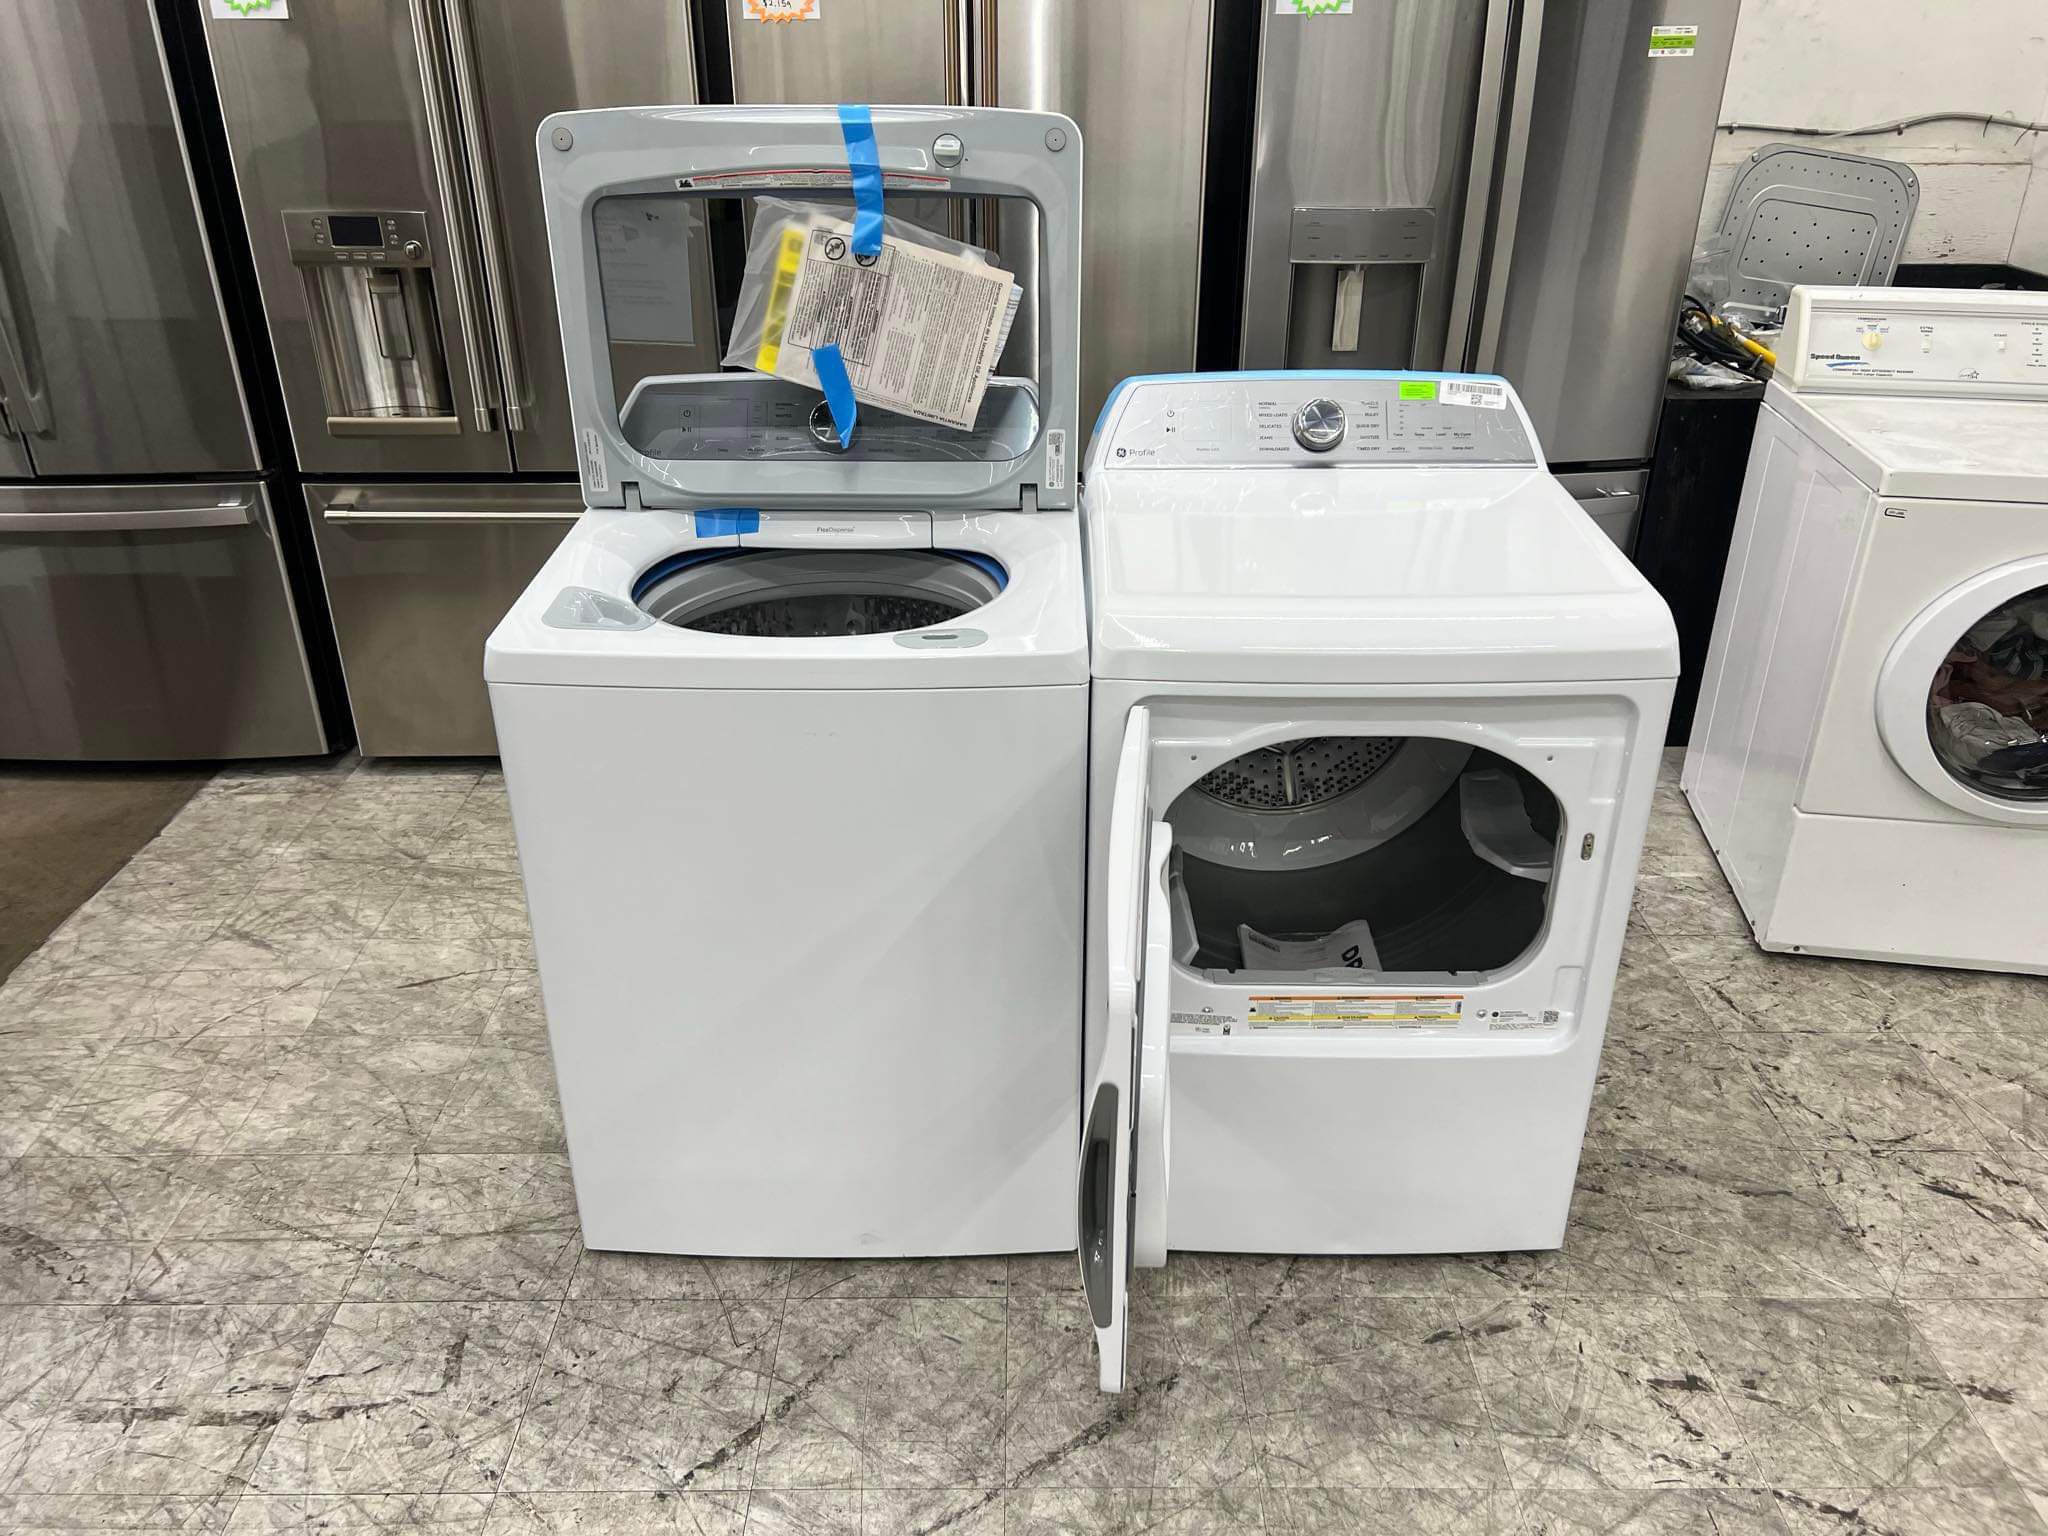 GE Profile 4.9 cuft top load washer and gas dryer with agitator